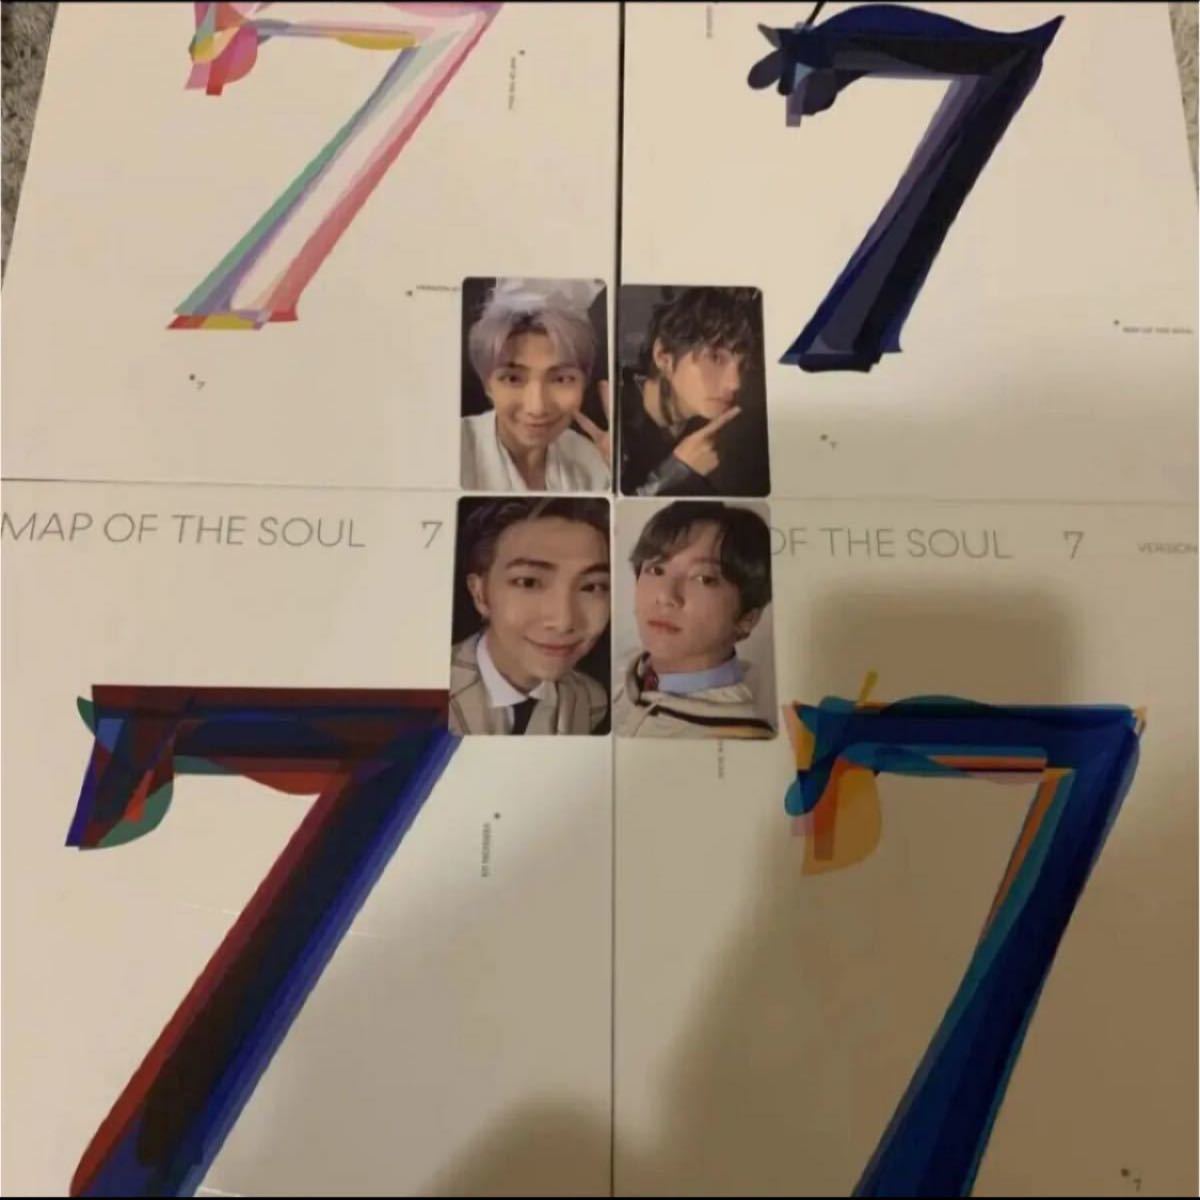 BTS MAP OF THE SOUL ：7 セット